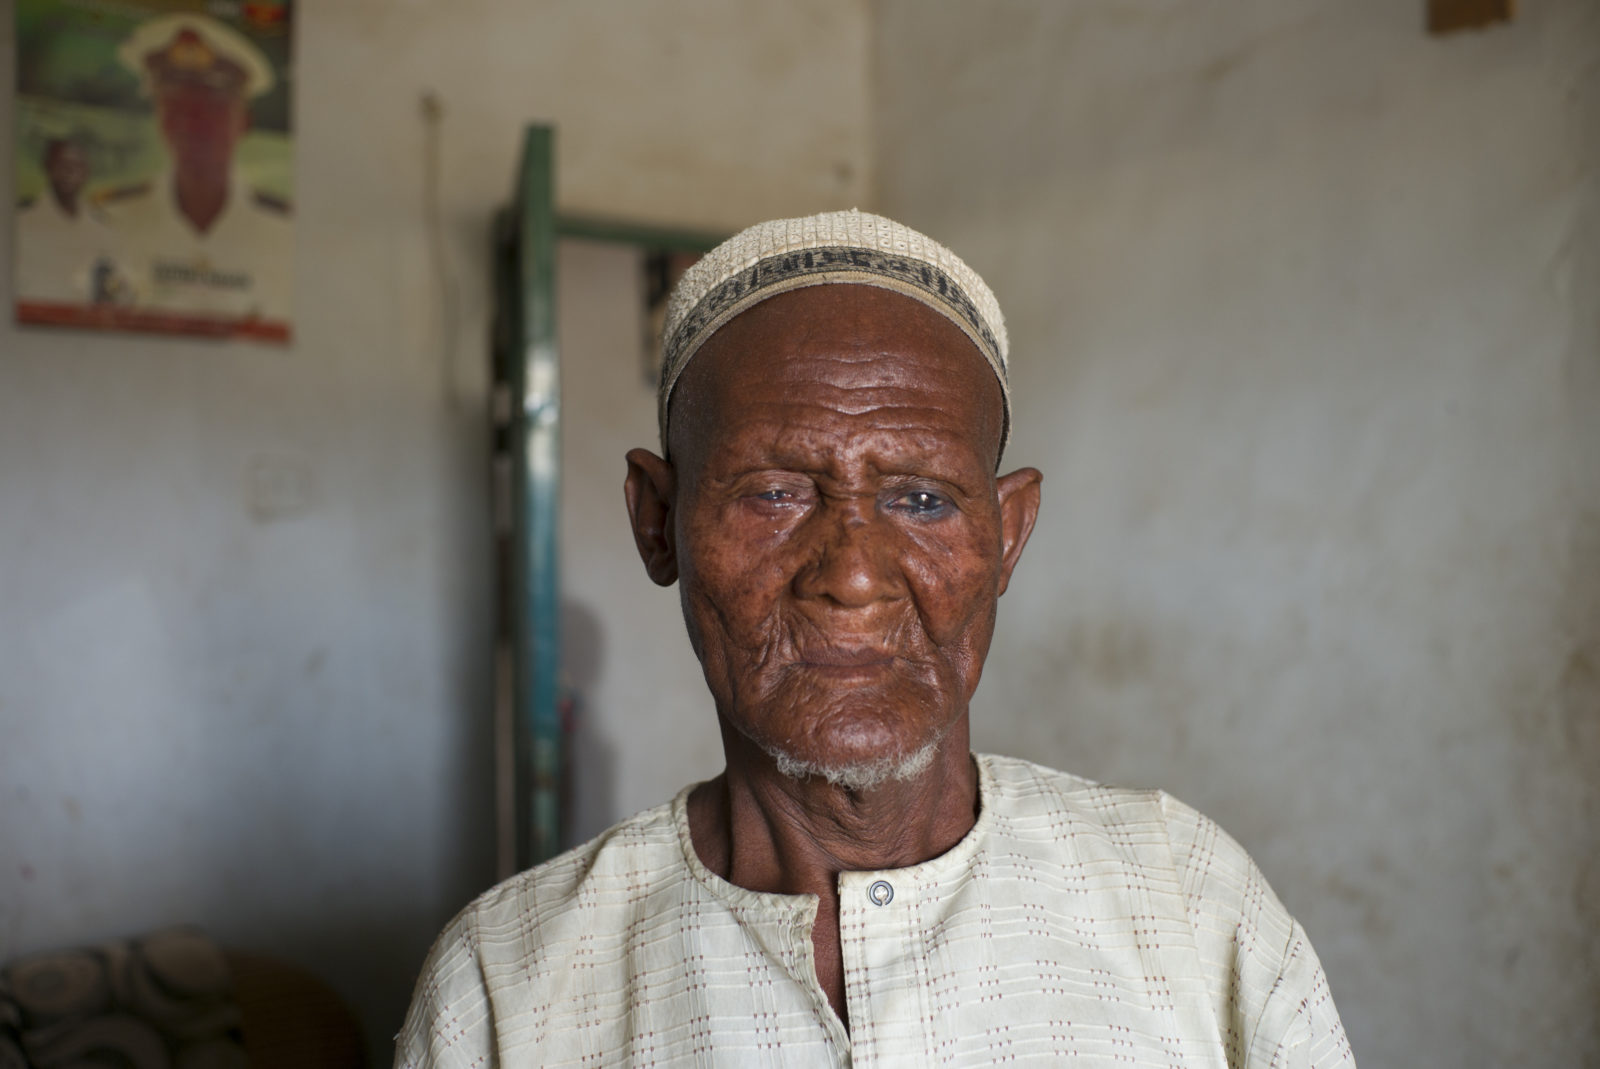 A man with trachoma looks down away from the camera. He is indoors and wearing a white hat and top.